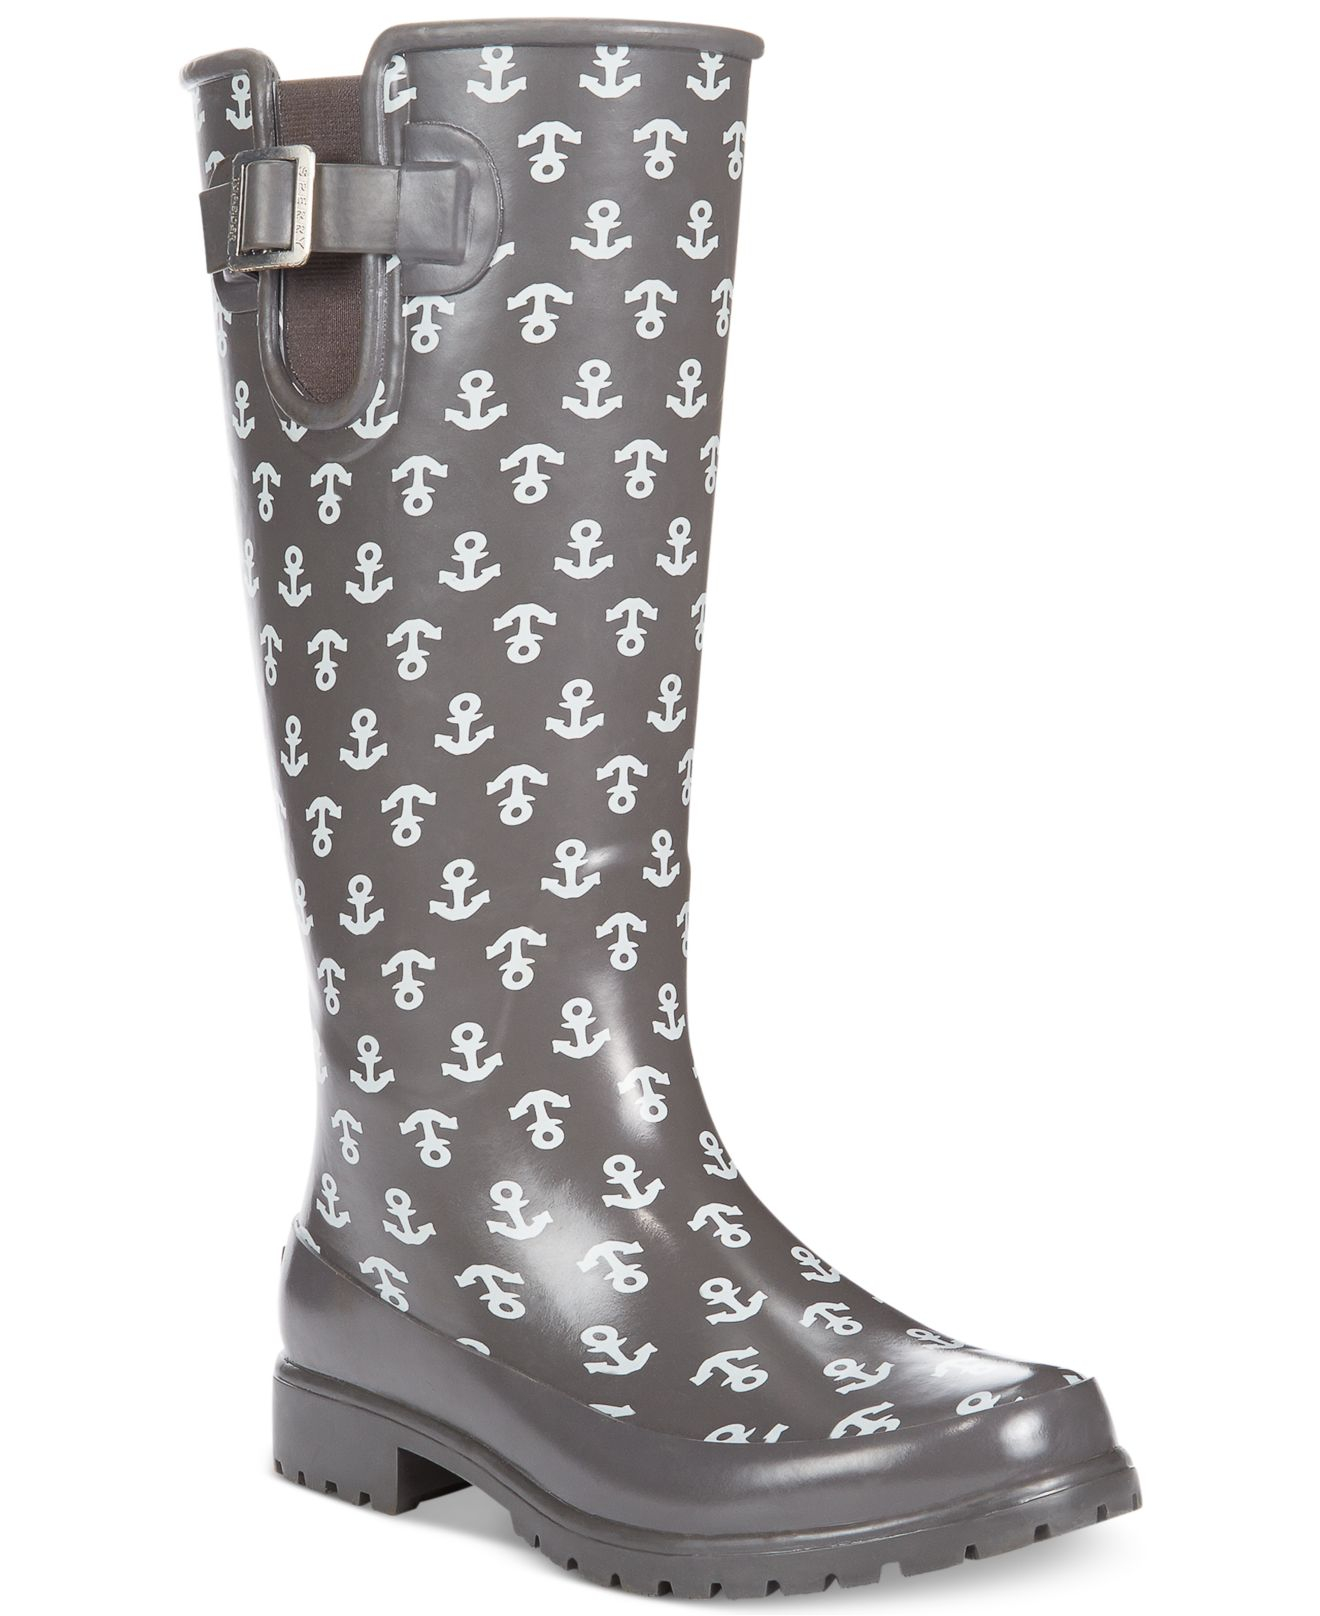 Sperry Top-sider Sperry Women'S Pelican Tall Rain Boots in Gray ...